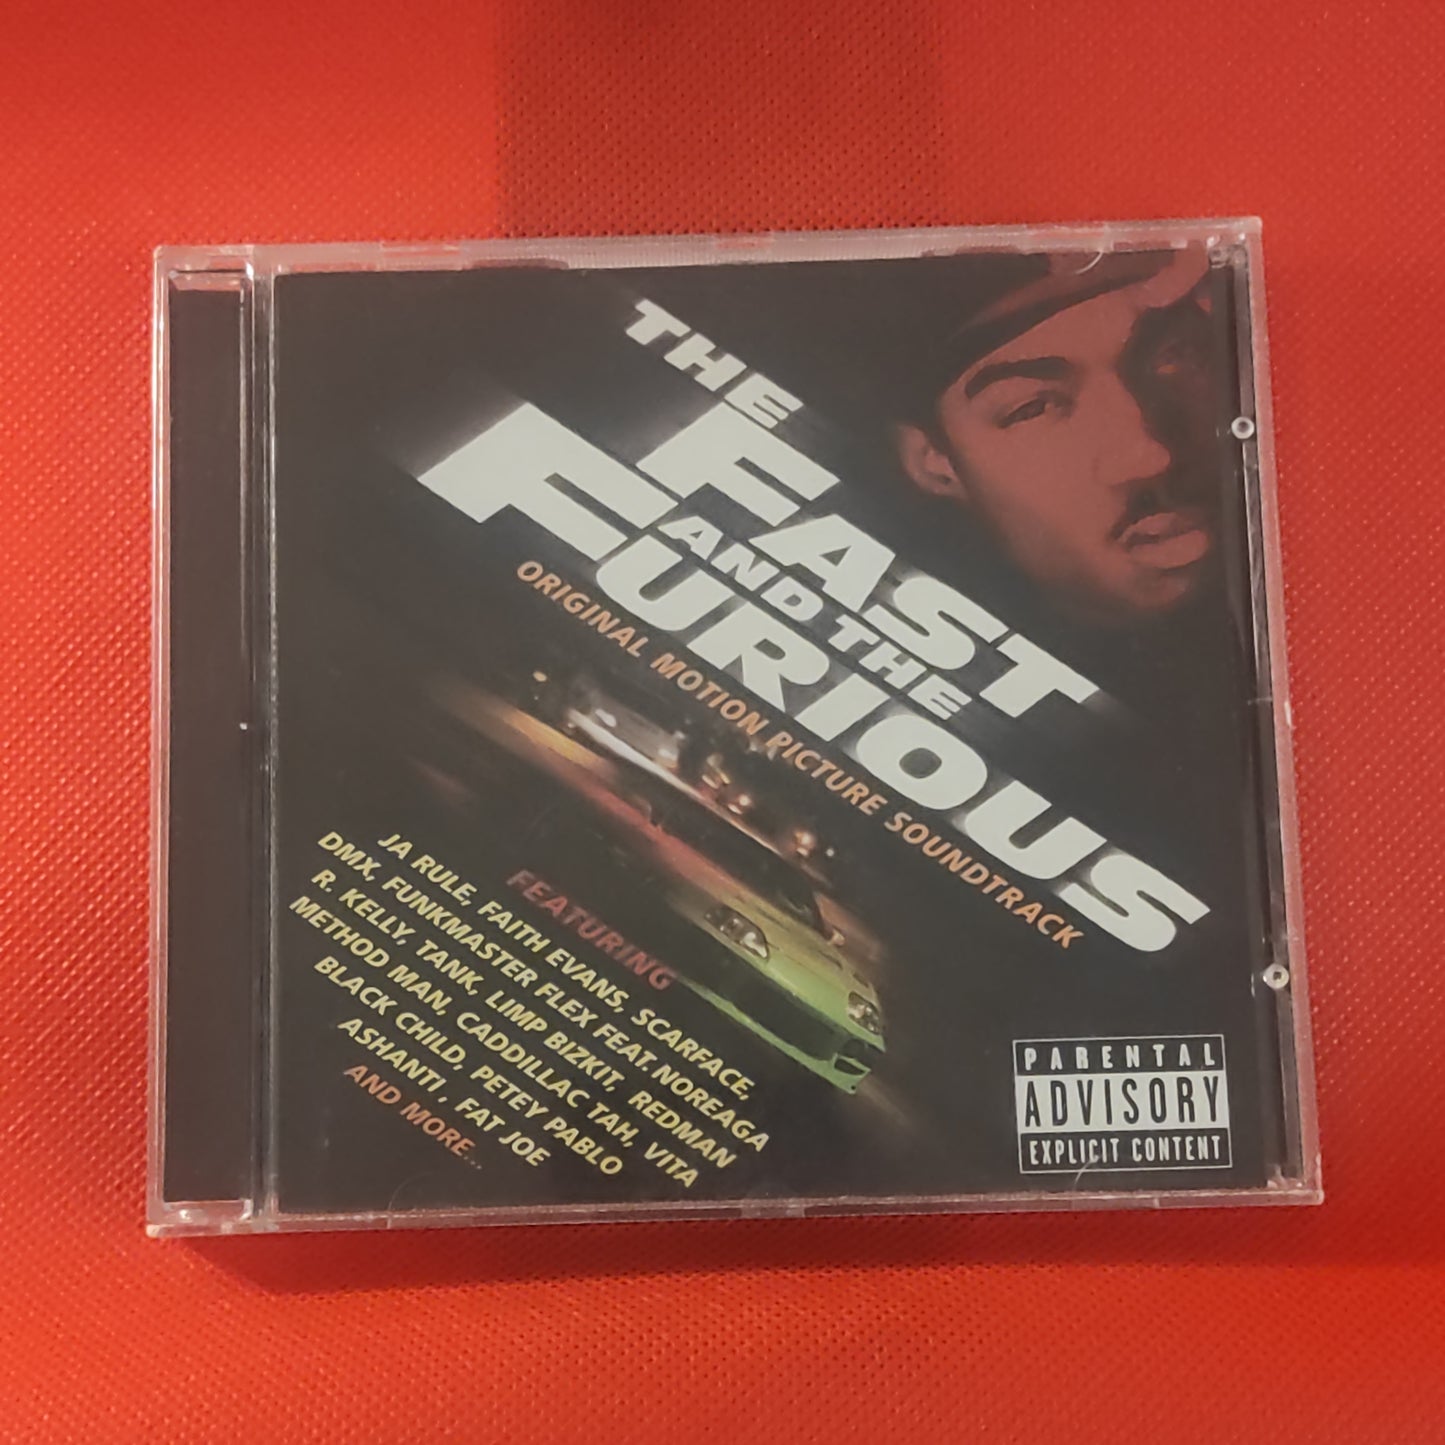 The Fast and Furious- original motion picture soundtrack